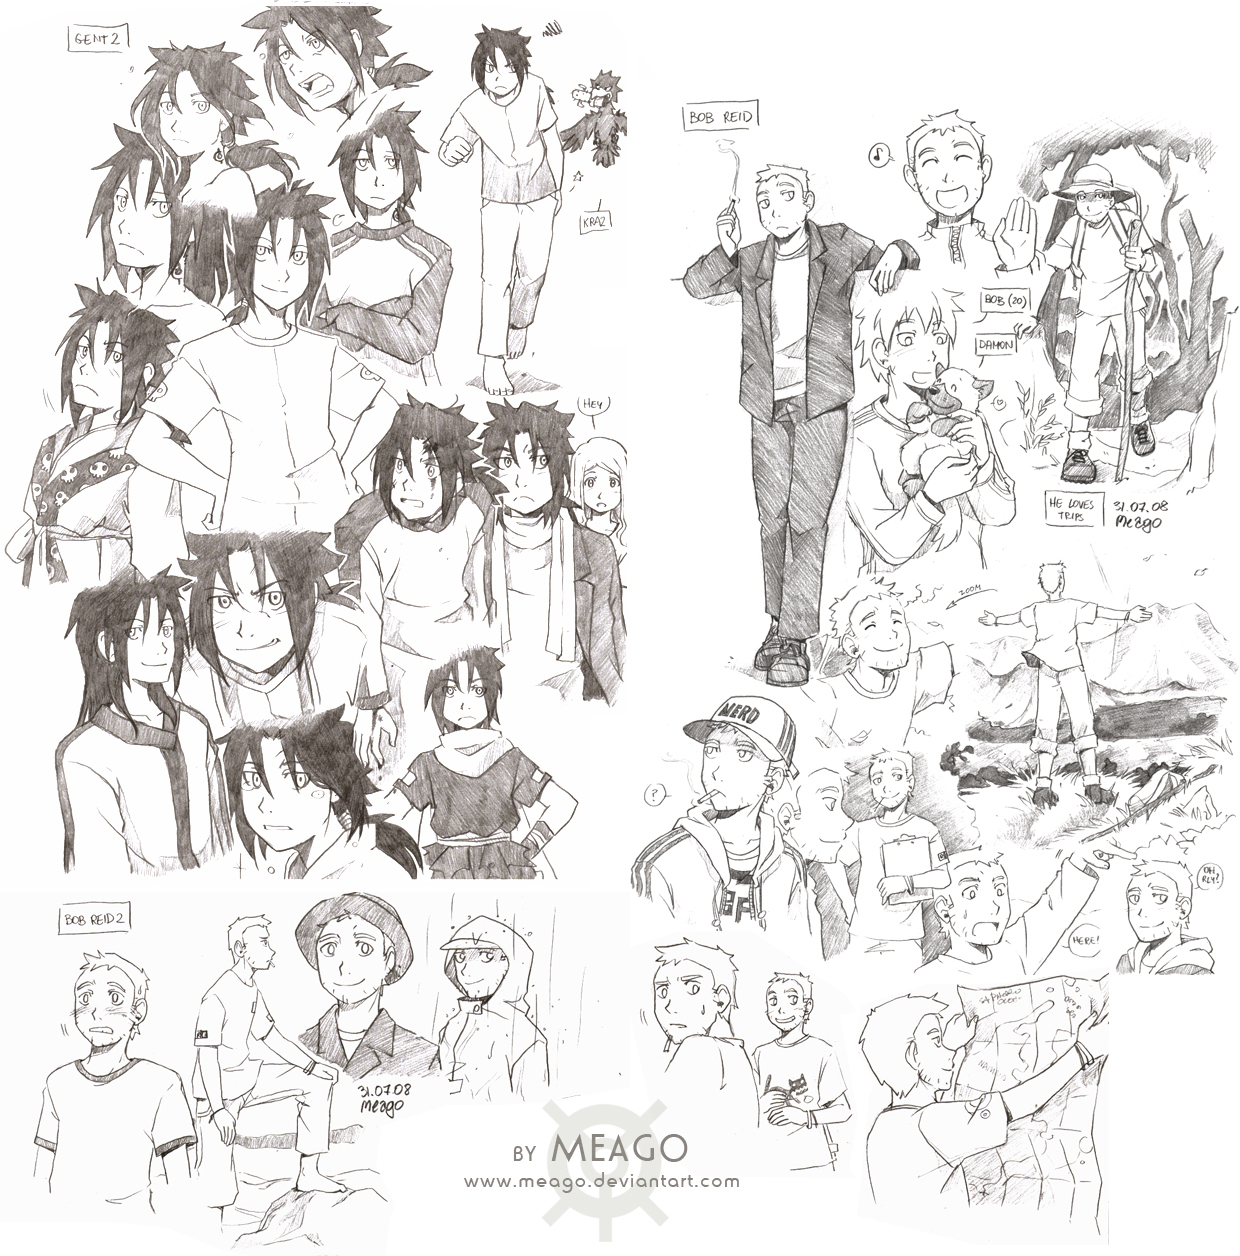 Meago 3: MS sketches